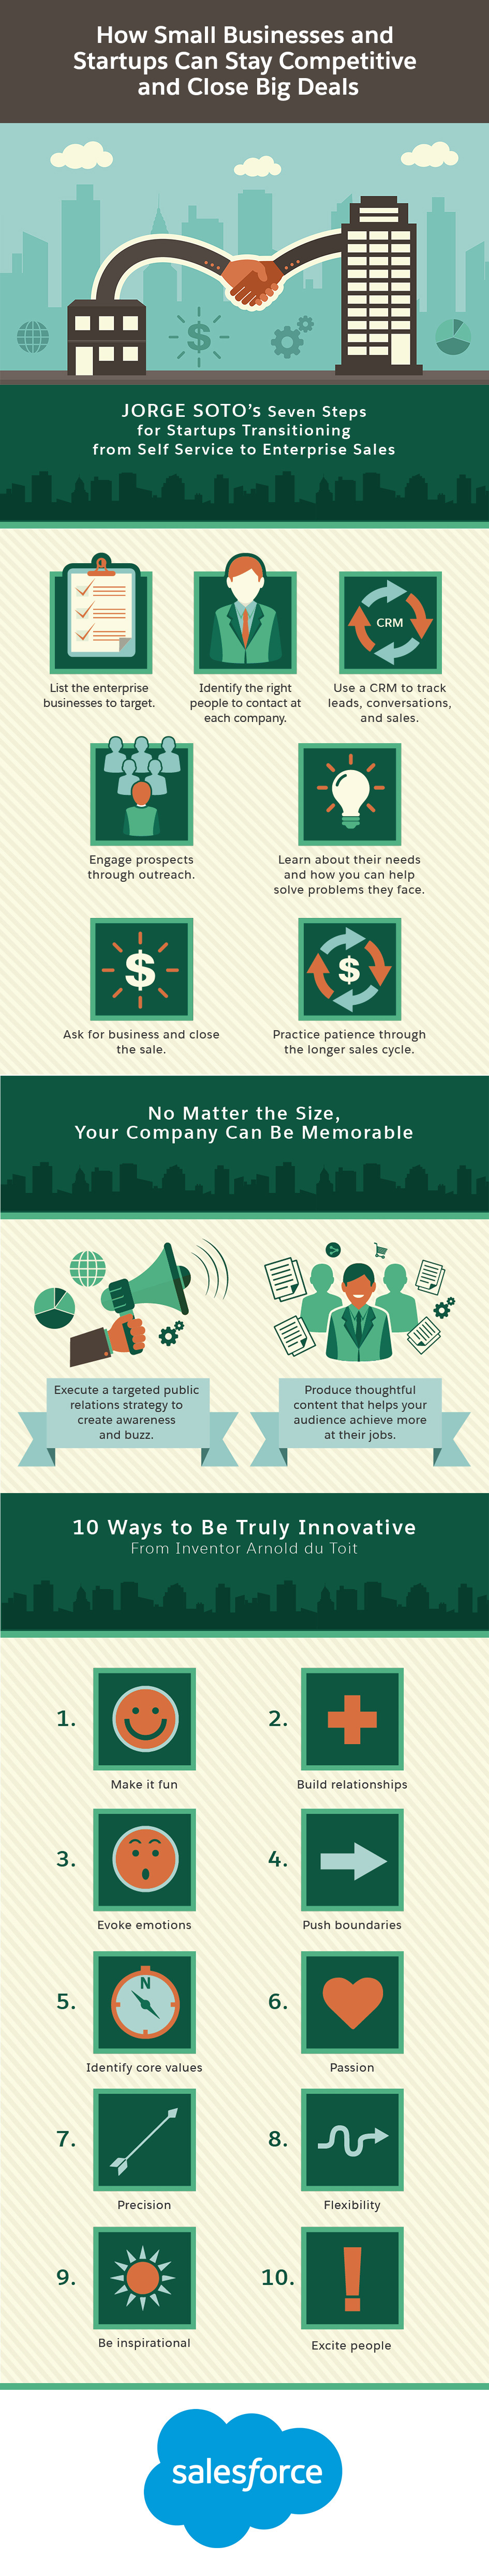 INFOGRAPHIC: How Small Businesses Can Close Big Deals